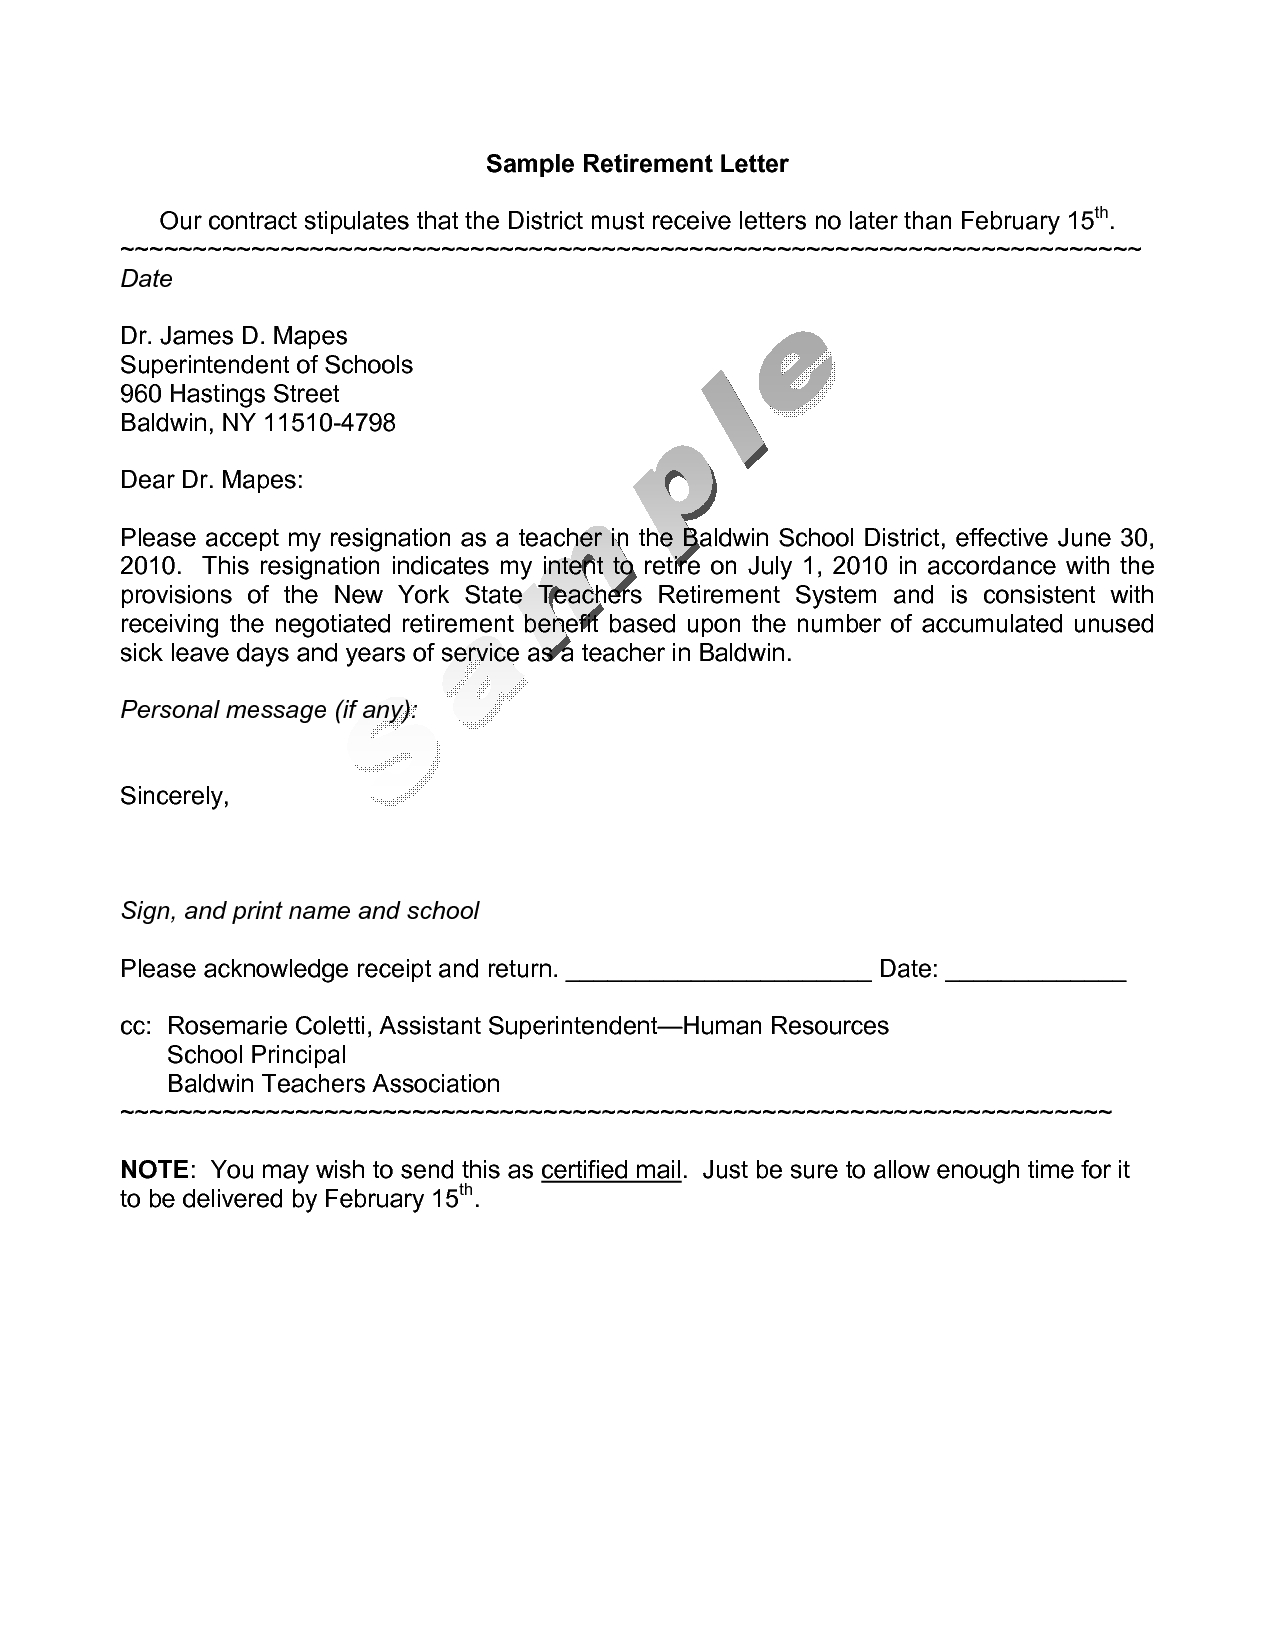 Letter Of Intent to Retire Template - Letter Intent Resignation Gallery Letter format formal Sample